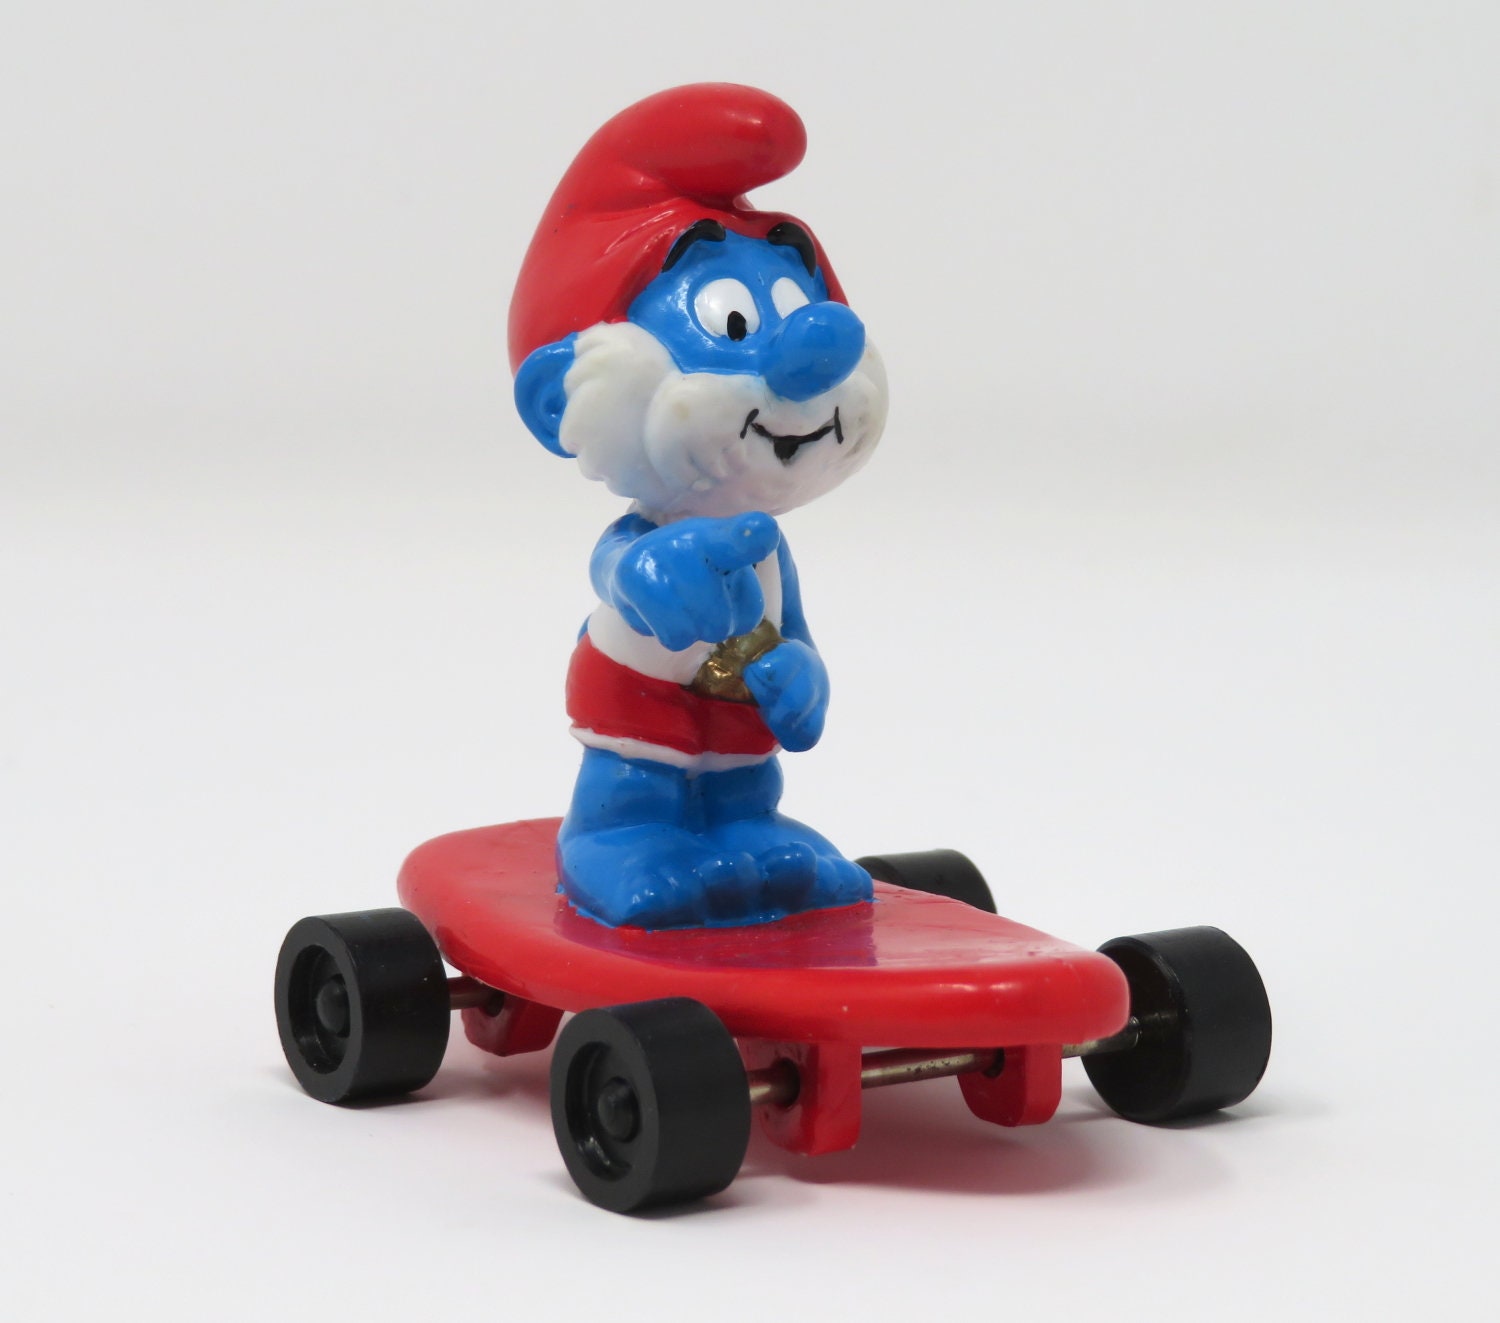 Round-Up: Cool and Adorable The Smurfs Toys and Gear!